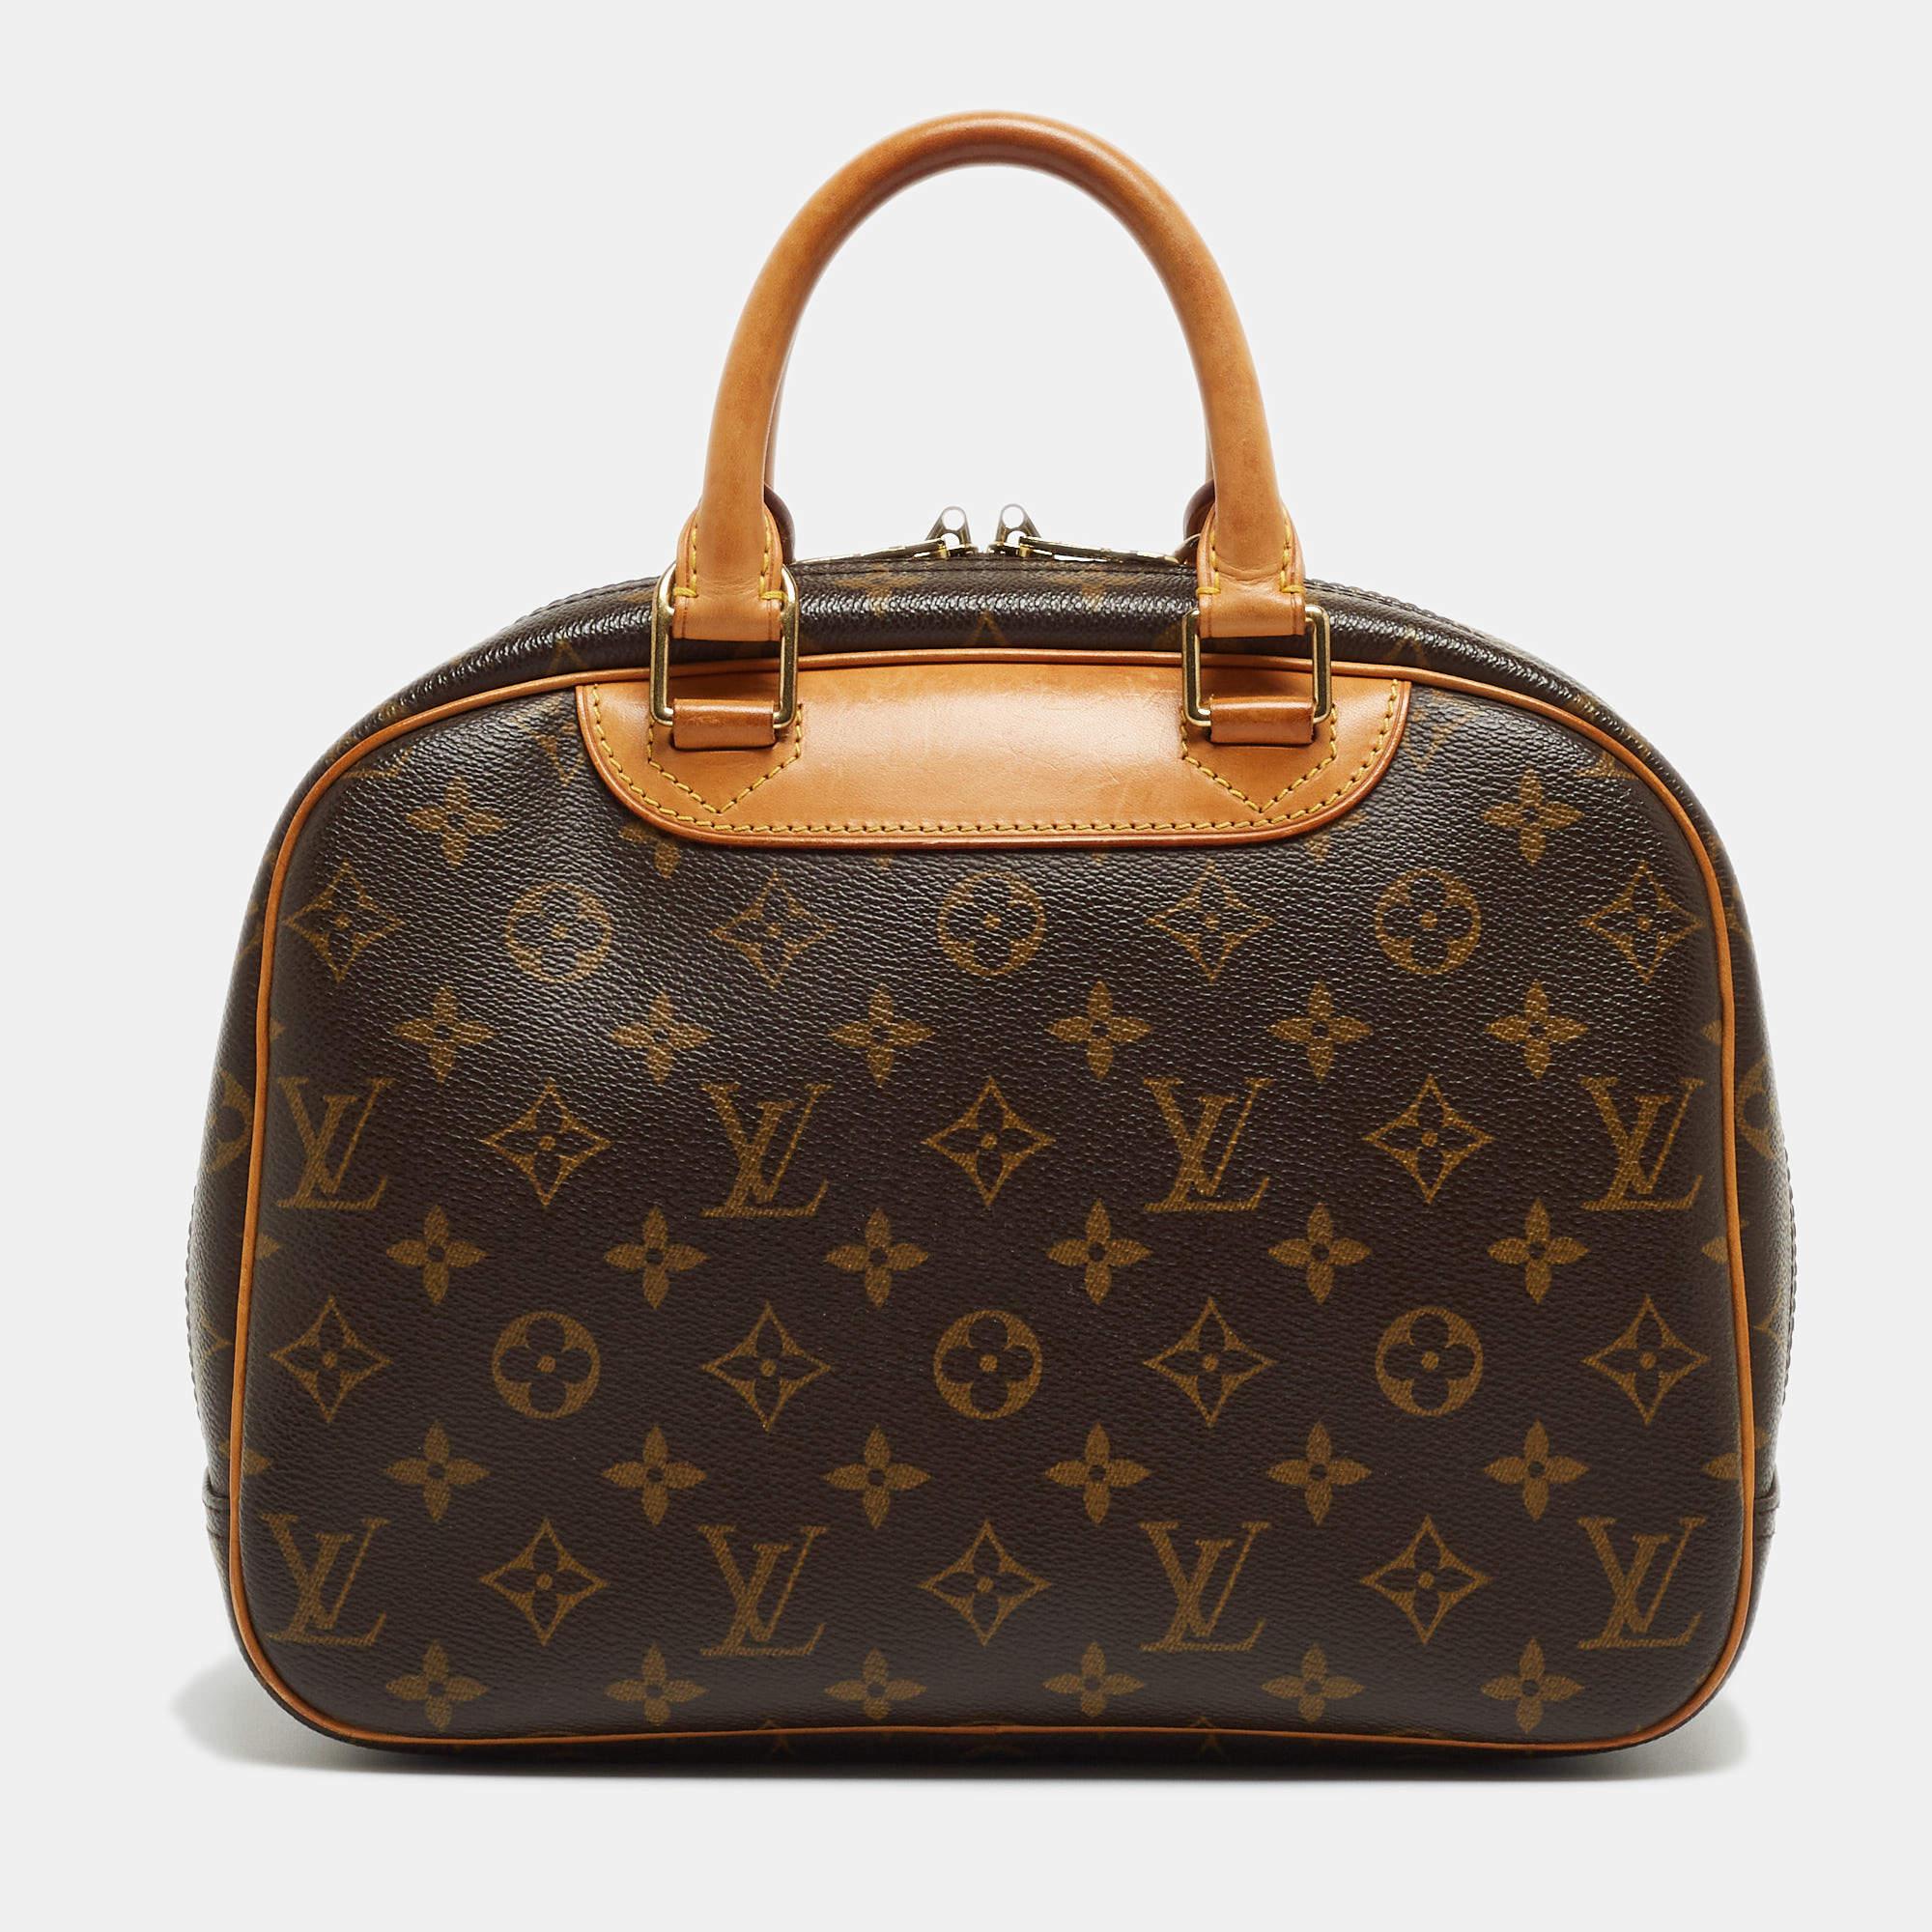 Louis Vuitton's handbags are popular owing to their high style and functionality. This bag, like all their designs, is durable and stylish. Exuding a fine finish, the LV Trouville bag is designed to give a luxurious experience. The interior has